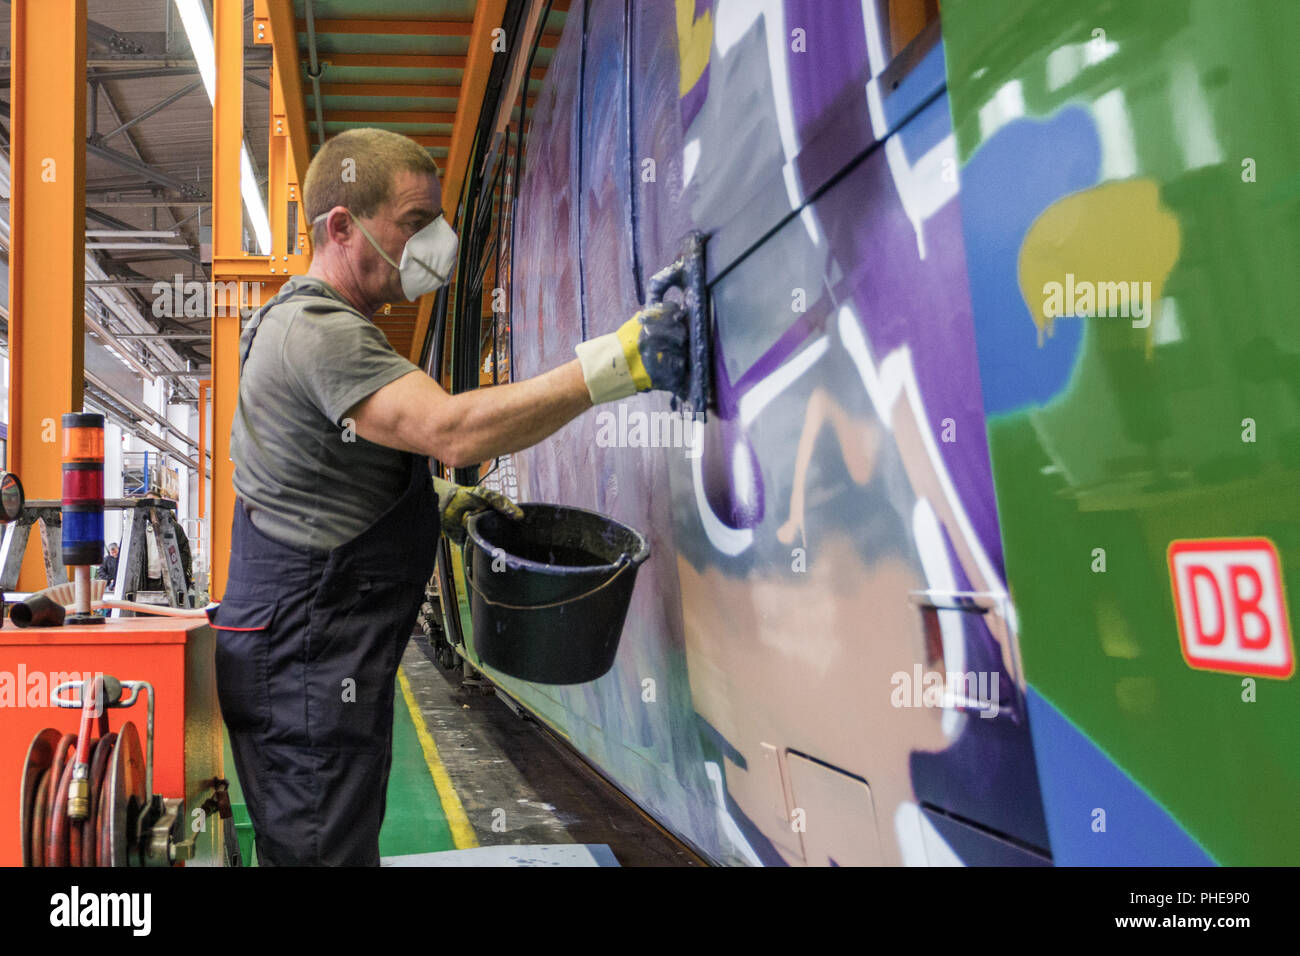 How Much Does Graffiti Removal Nyc Service Cost?